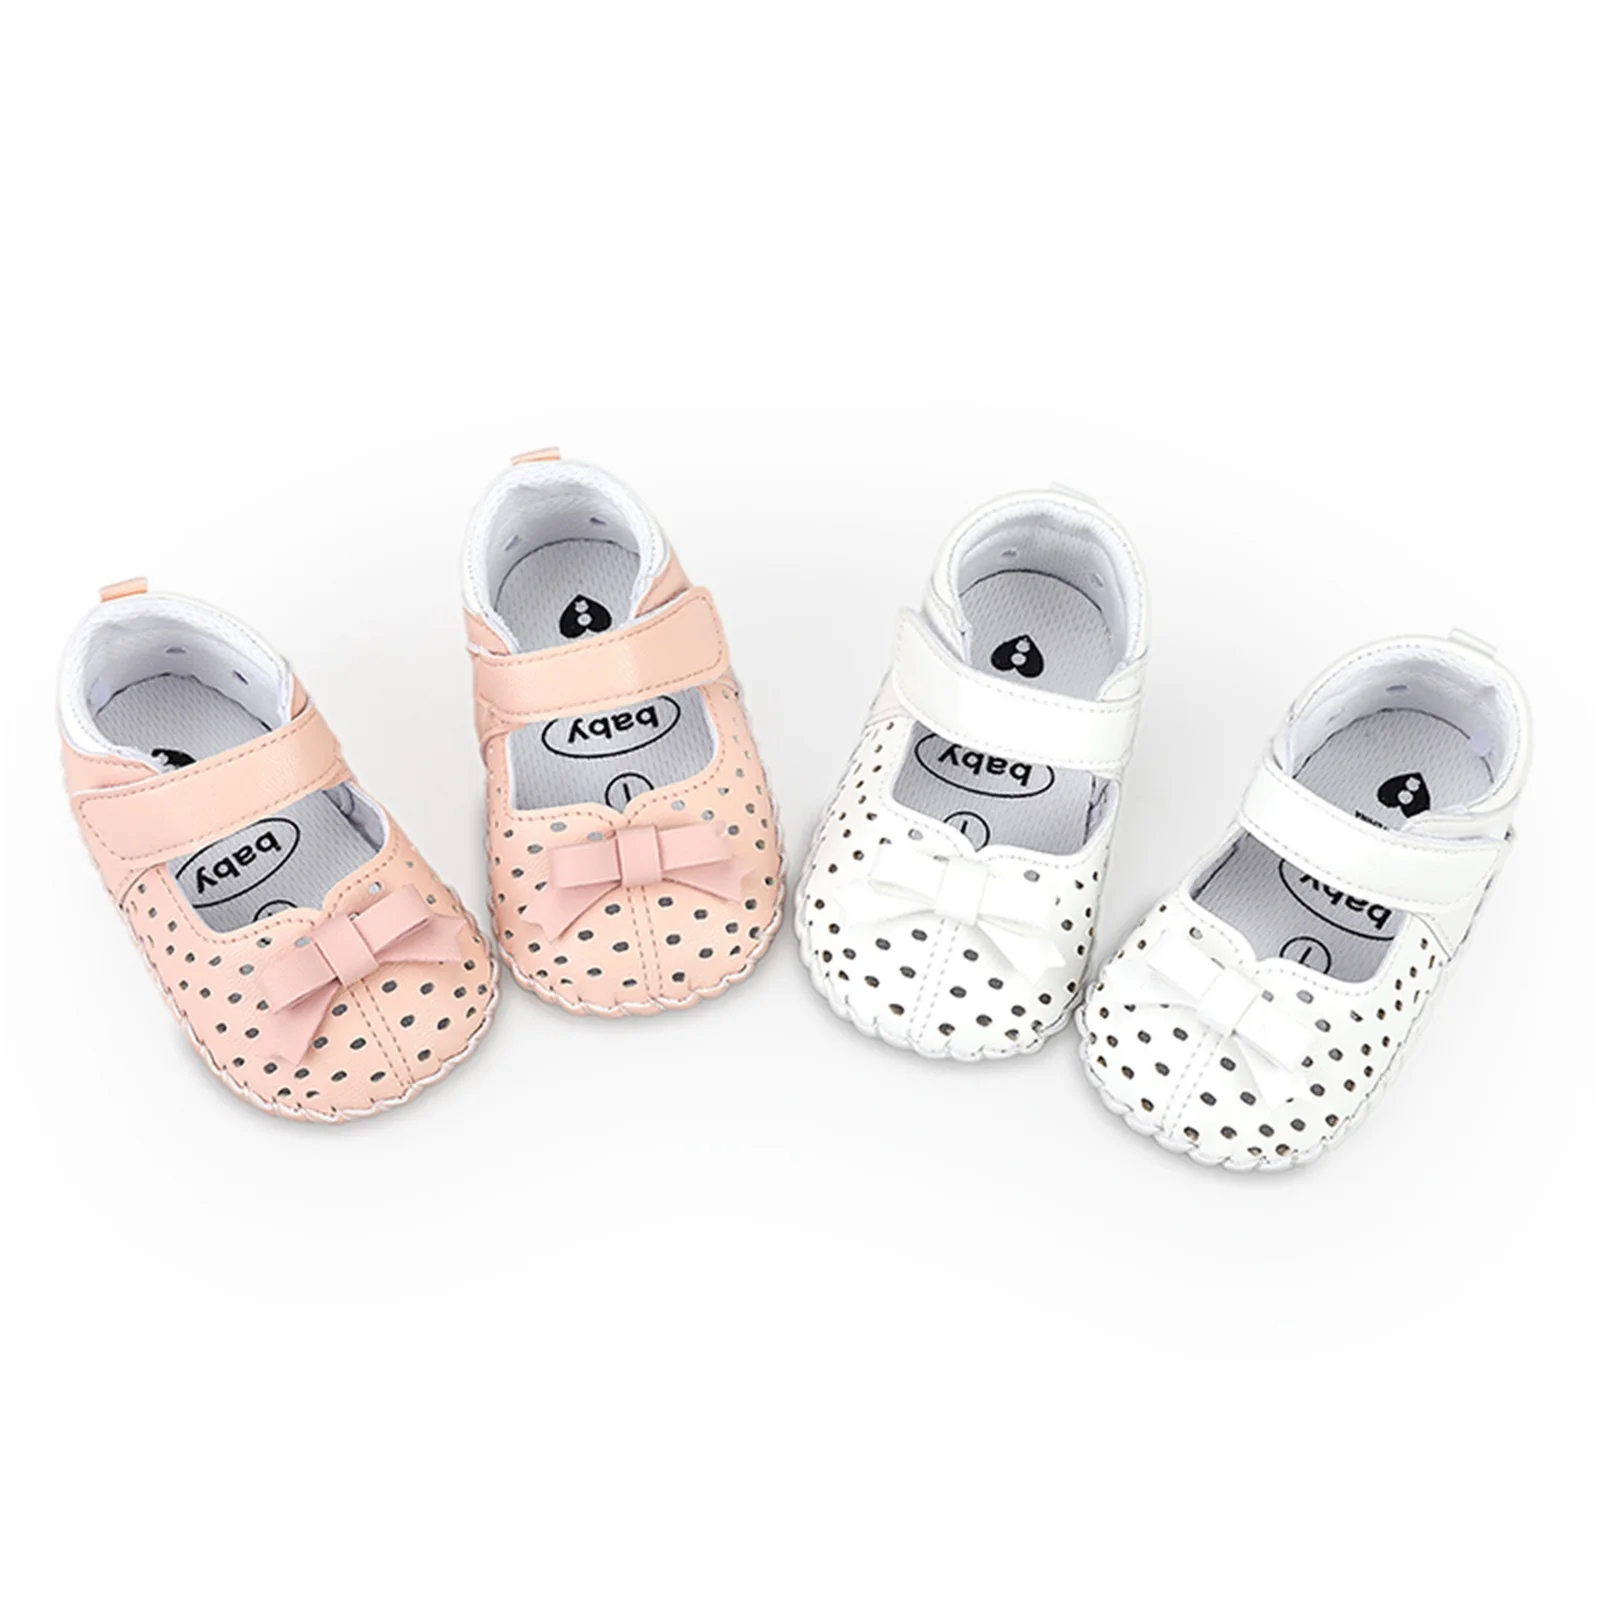 

Baby Girl Summer Shoes Breathable Anti-Slip Soft Sole Home Street Casual Cutout Sandal Shoes